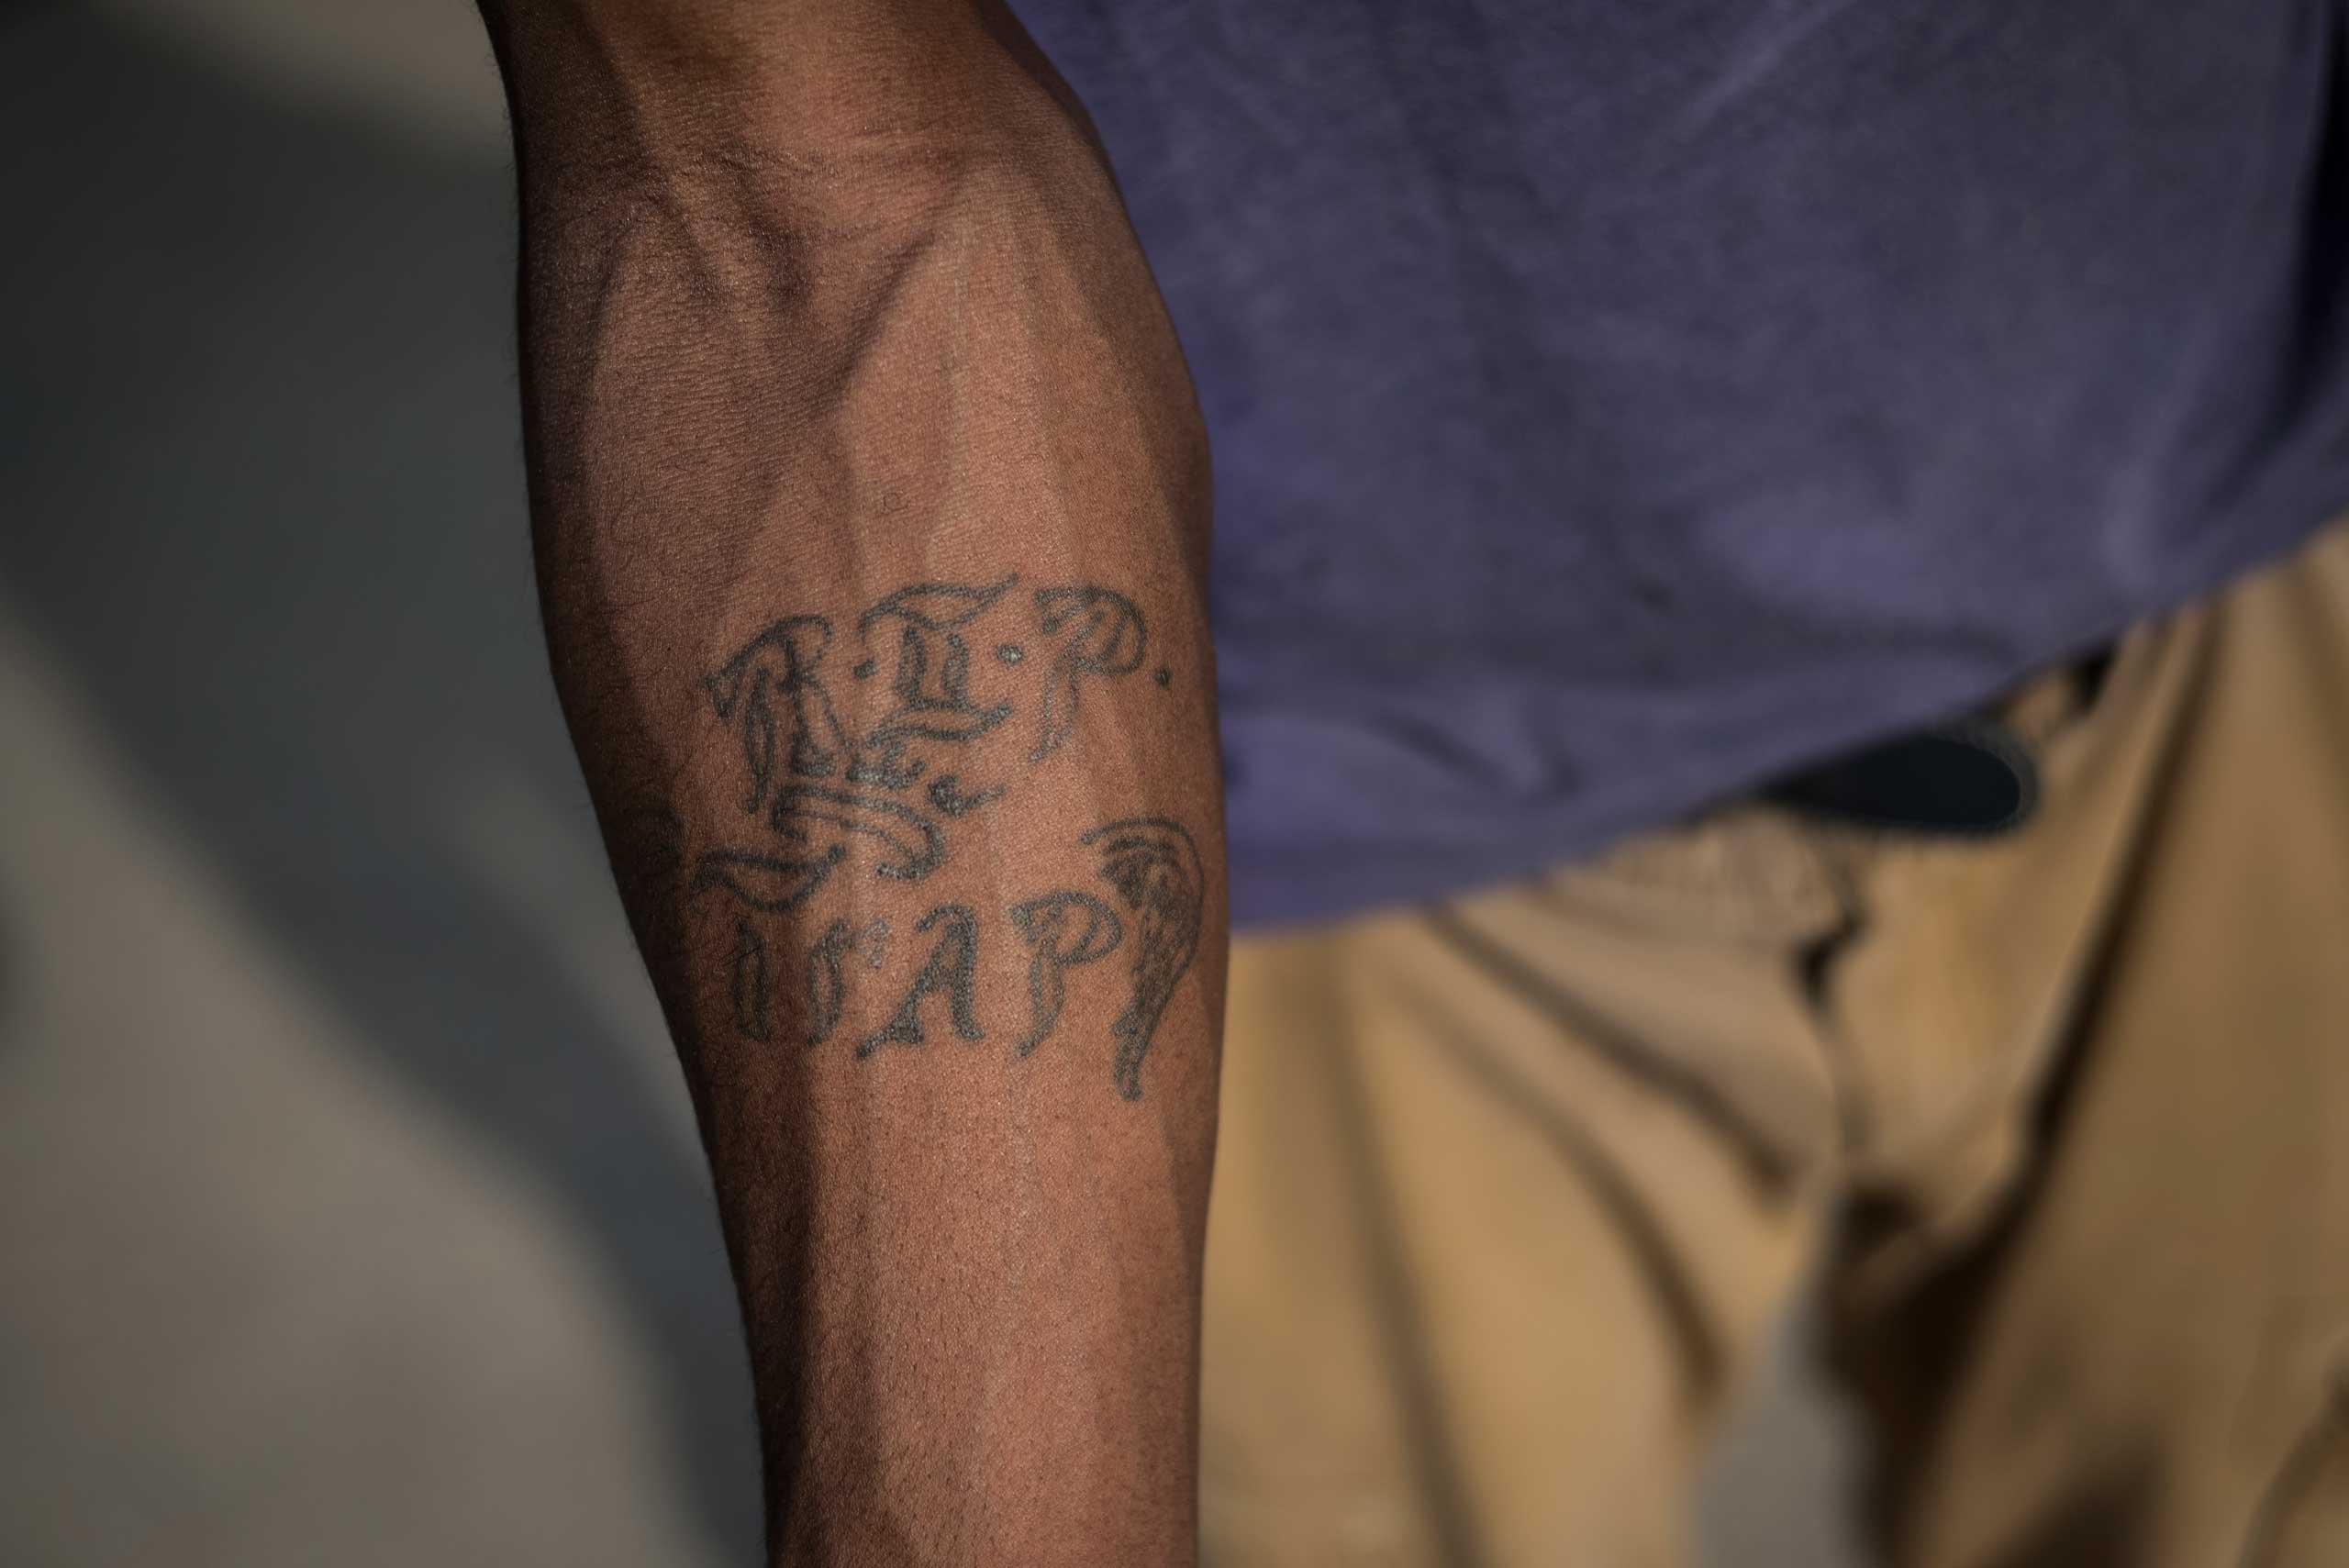 Raymon  Trip  Williams shows his tattoo dedicated to his best friend Demetrius  Trap  Stegall, who was shot and killed in Ferguson, Mo. in 2009.